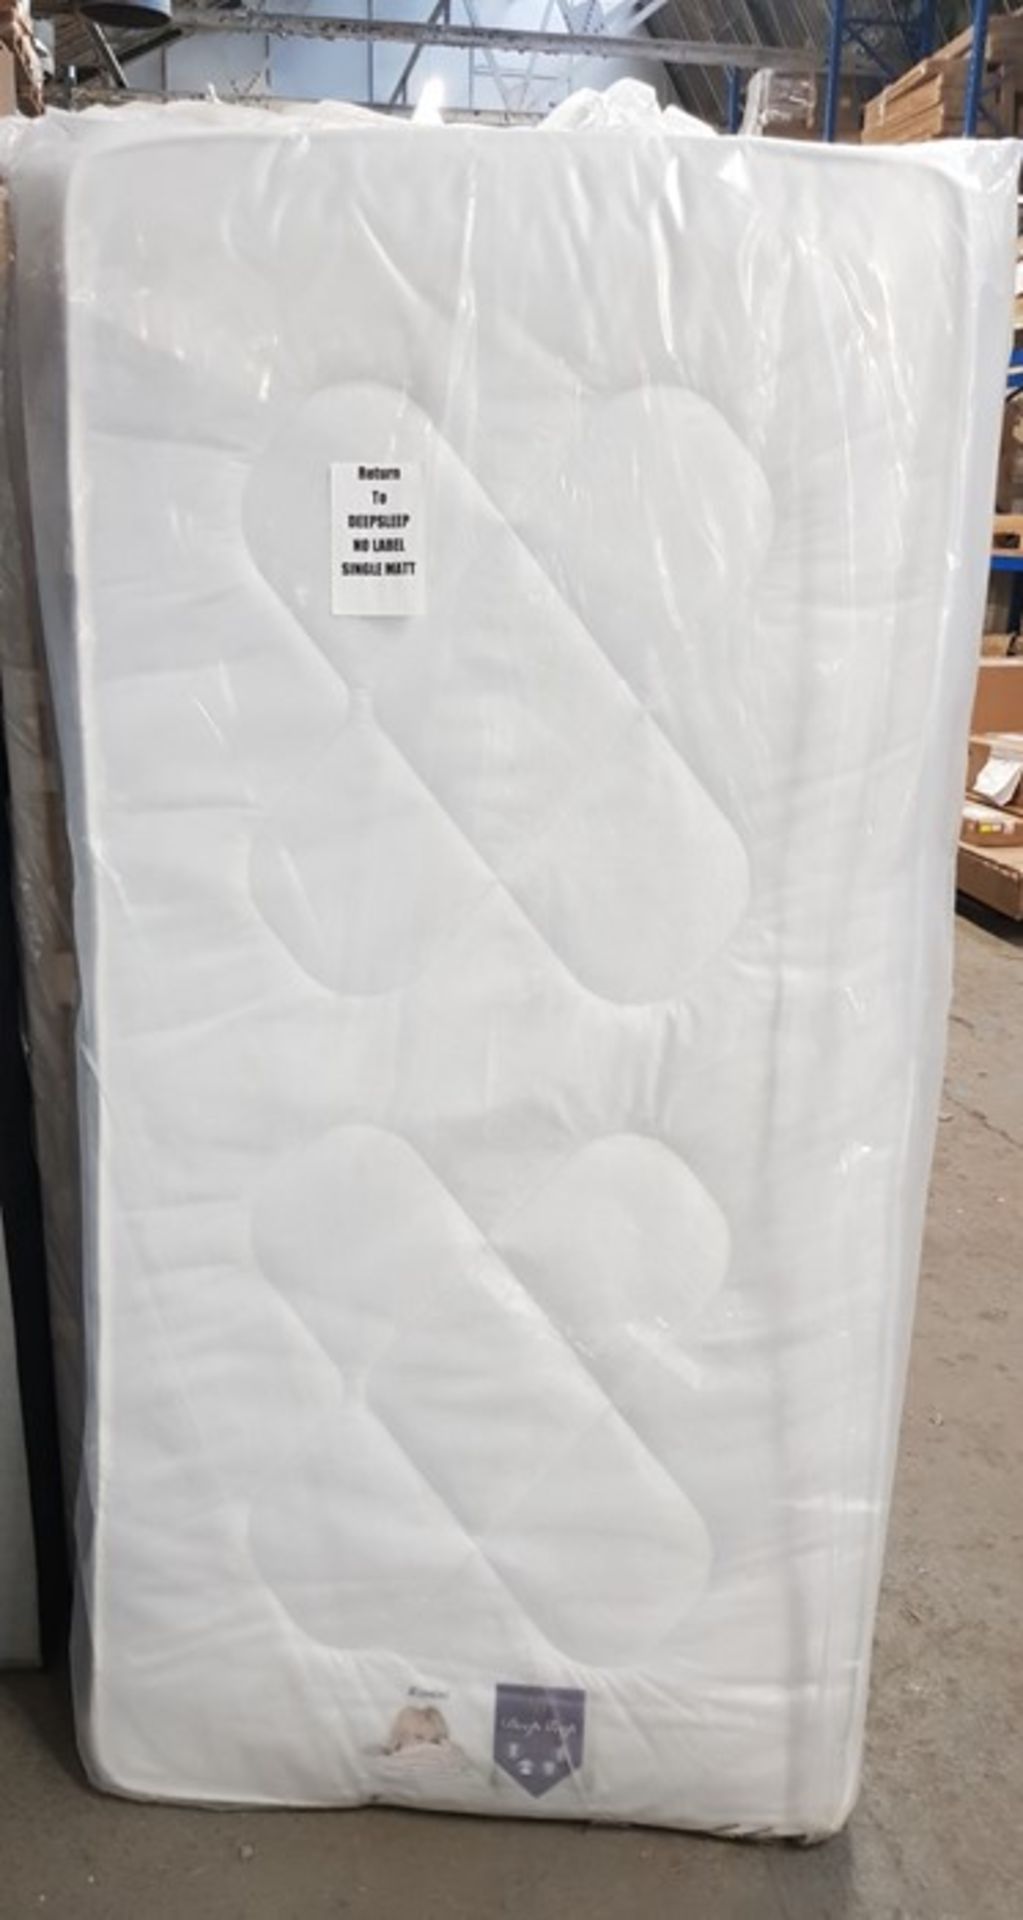 1 BAGGED 90CM SINGLE POCKET SPRUNG MATTRESS / RRP £119.99 (PUBLIC VIEWING AVAILABLE)